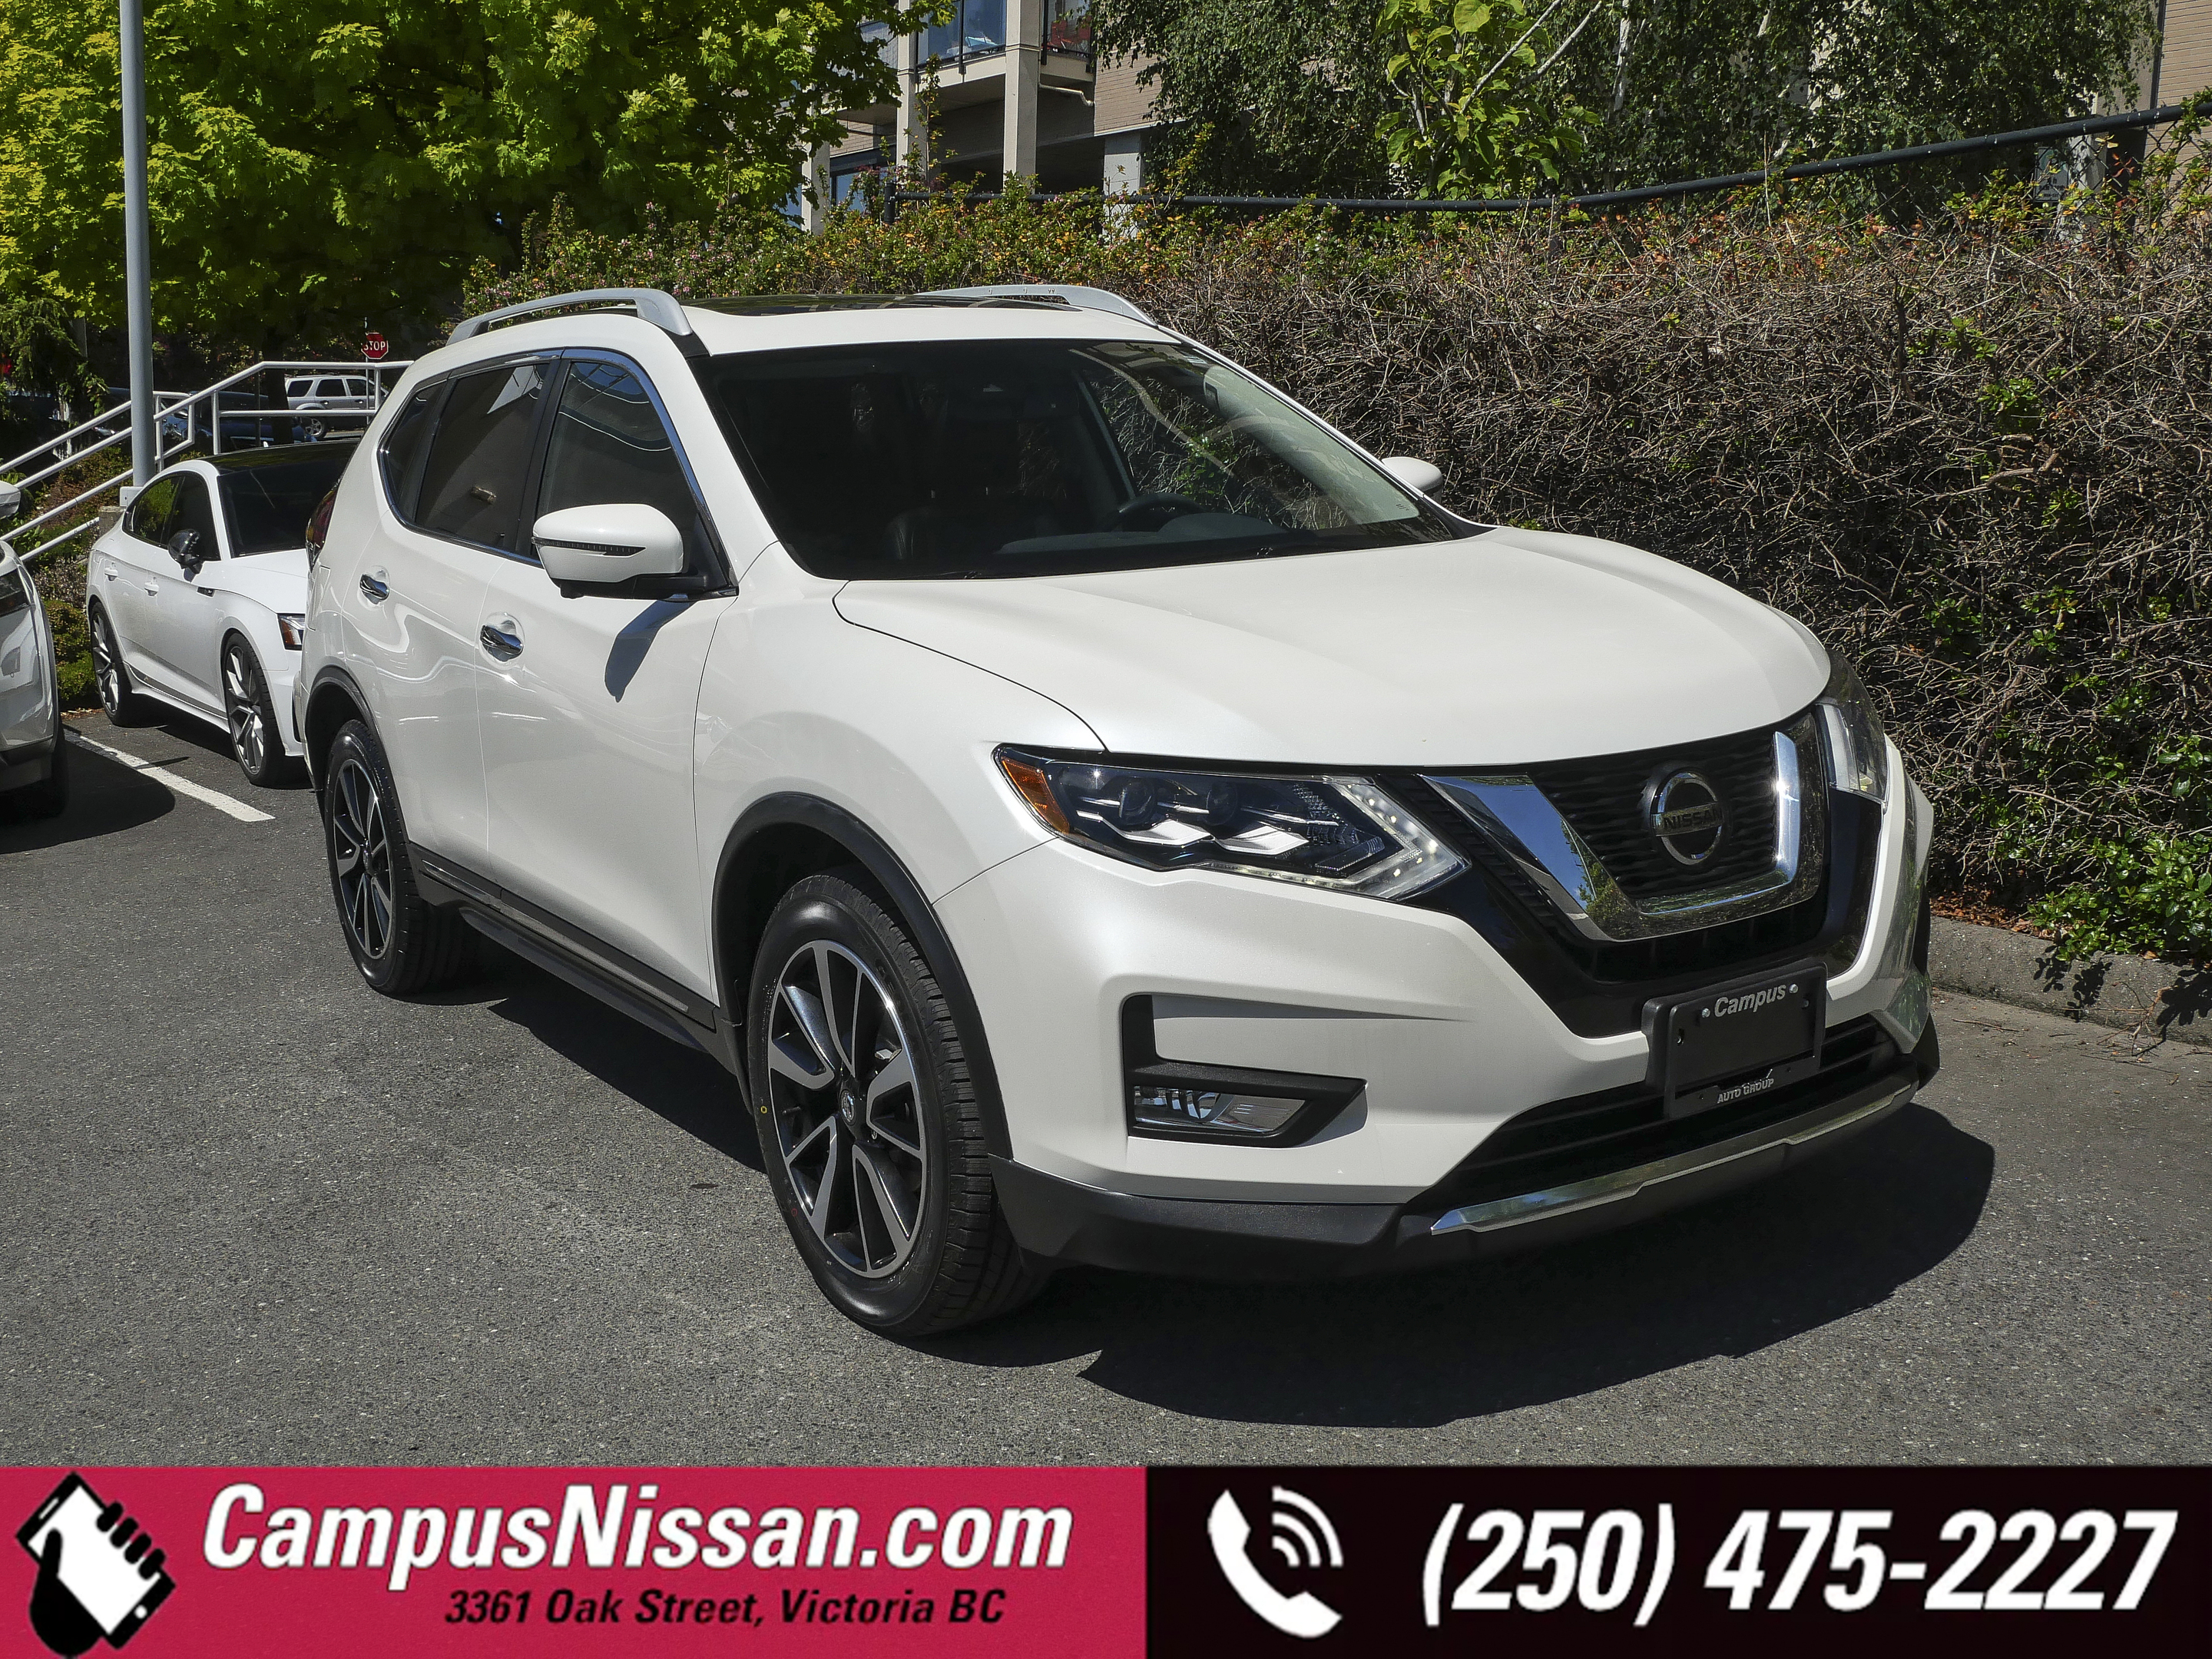 2018 Nissan Rogue AWD SL | Campus Serviced | Low KMs | 